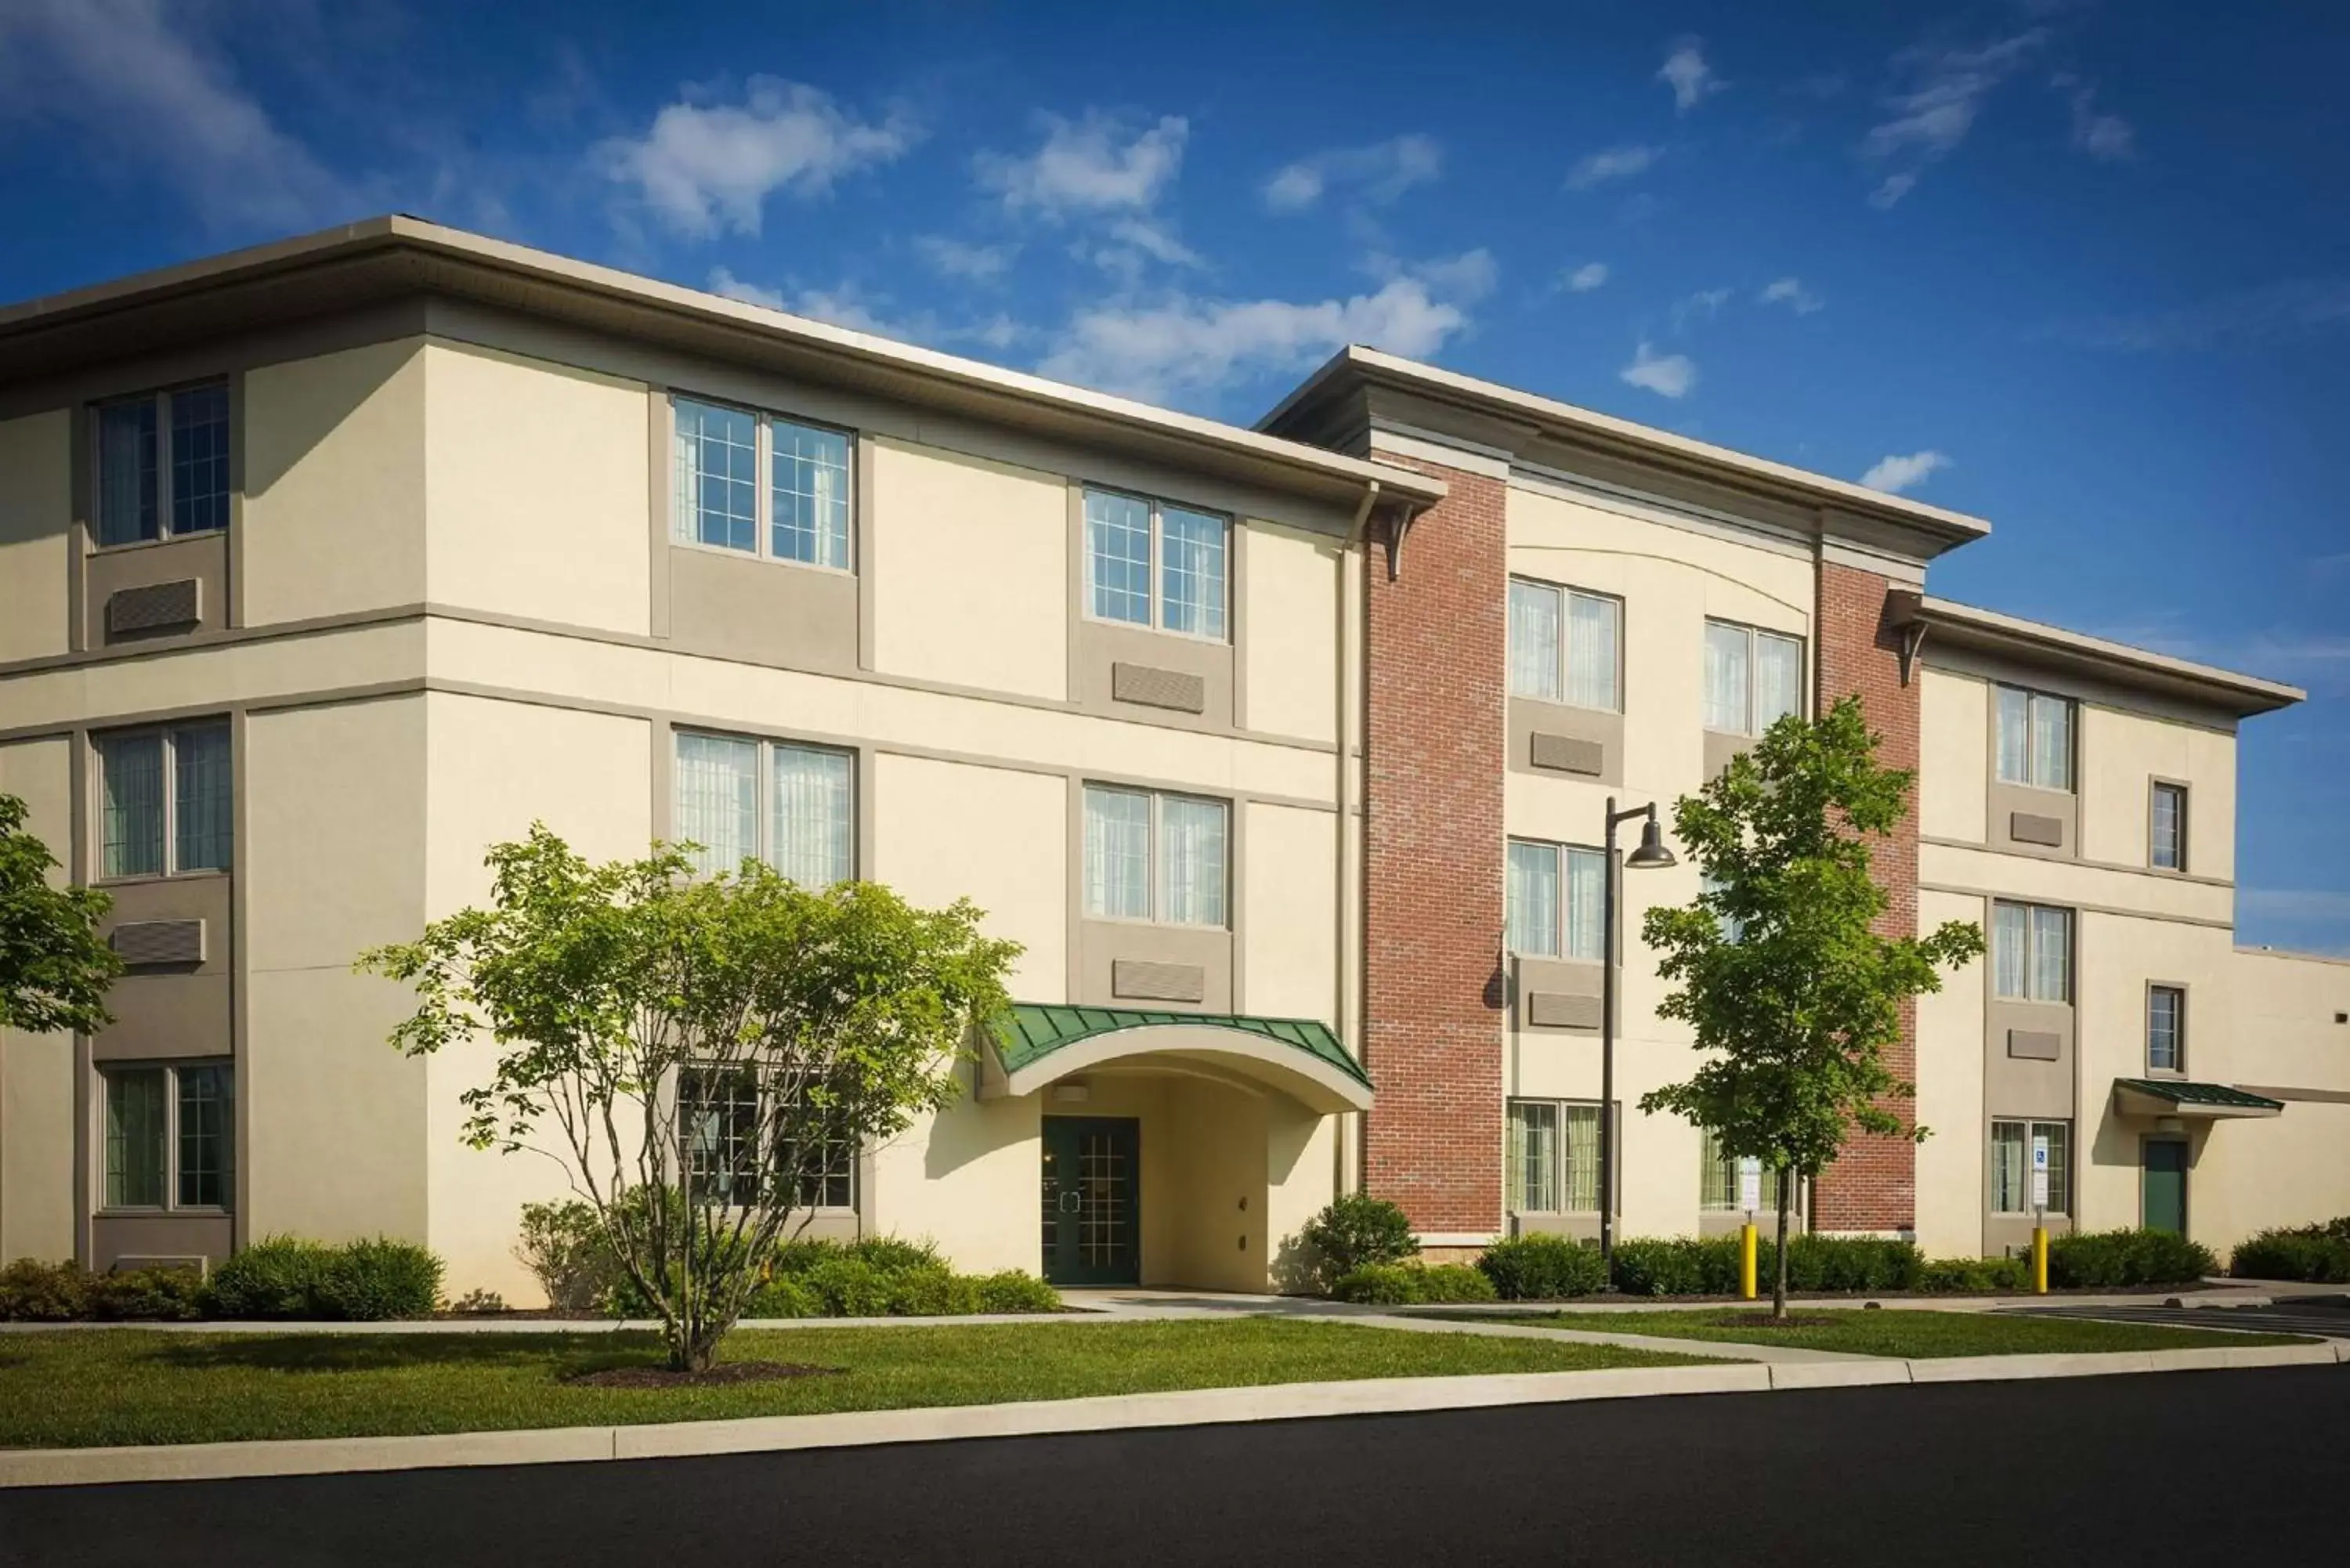 Property Building in Best Western Plus - King of Prussia